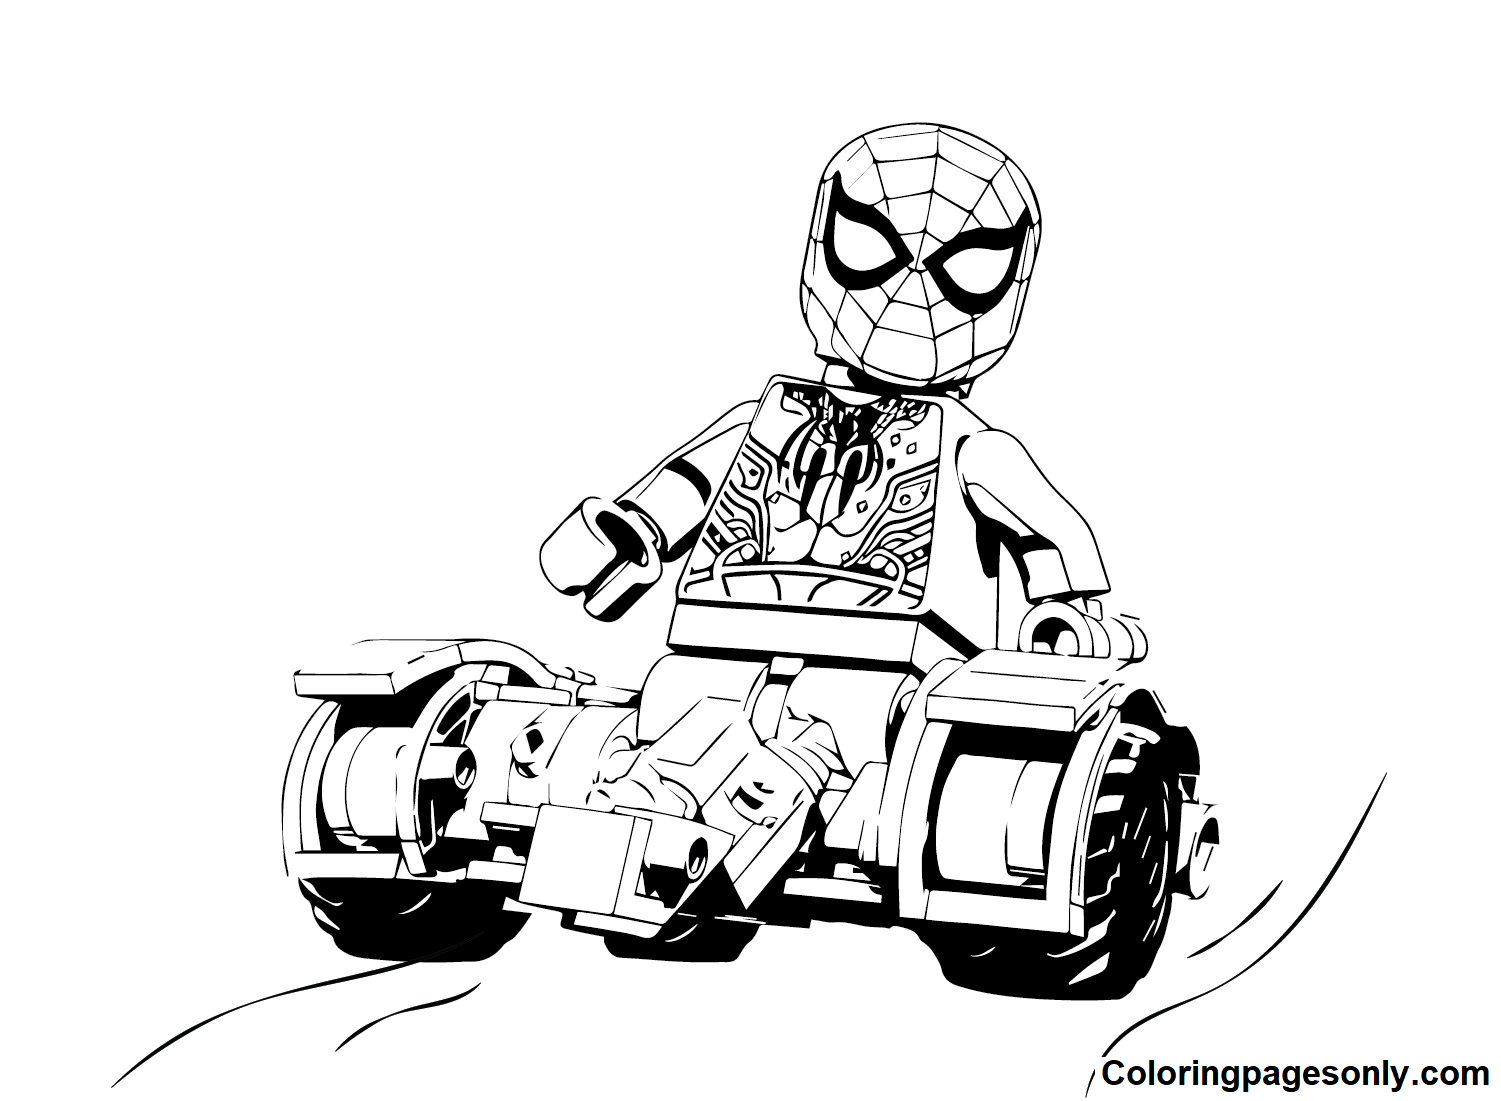 lego spiderman coloring page